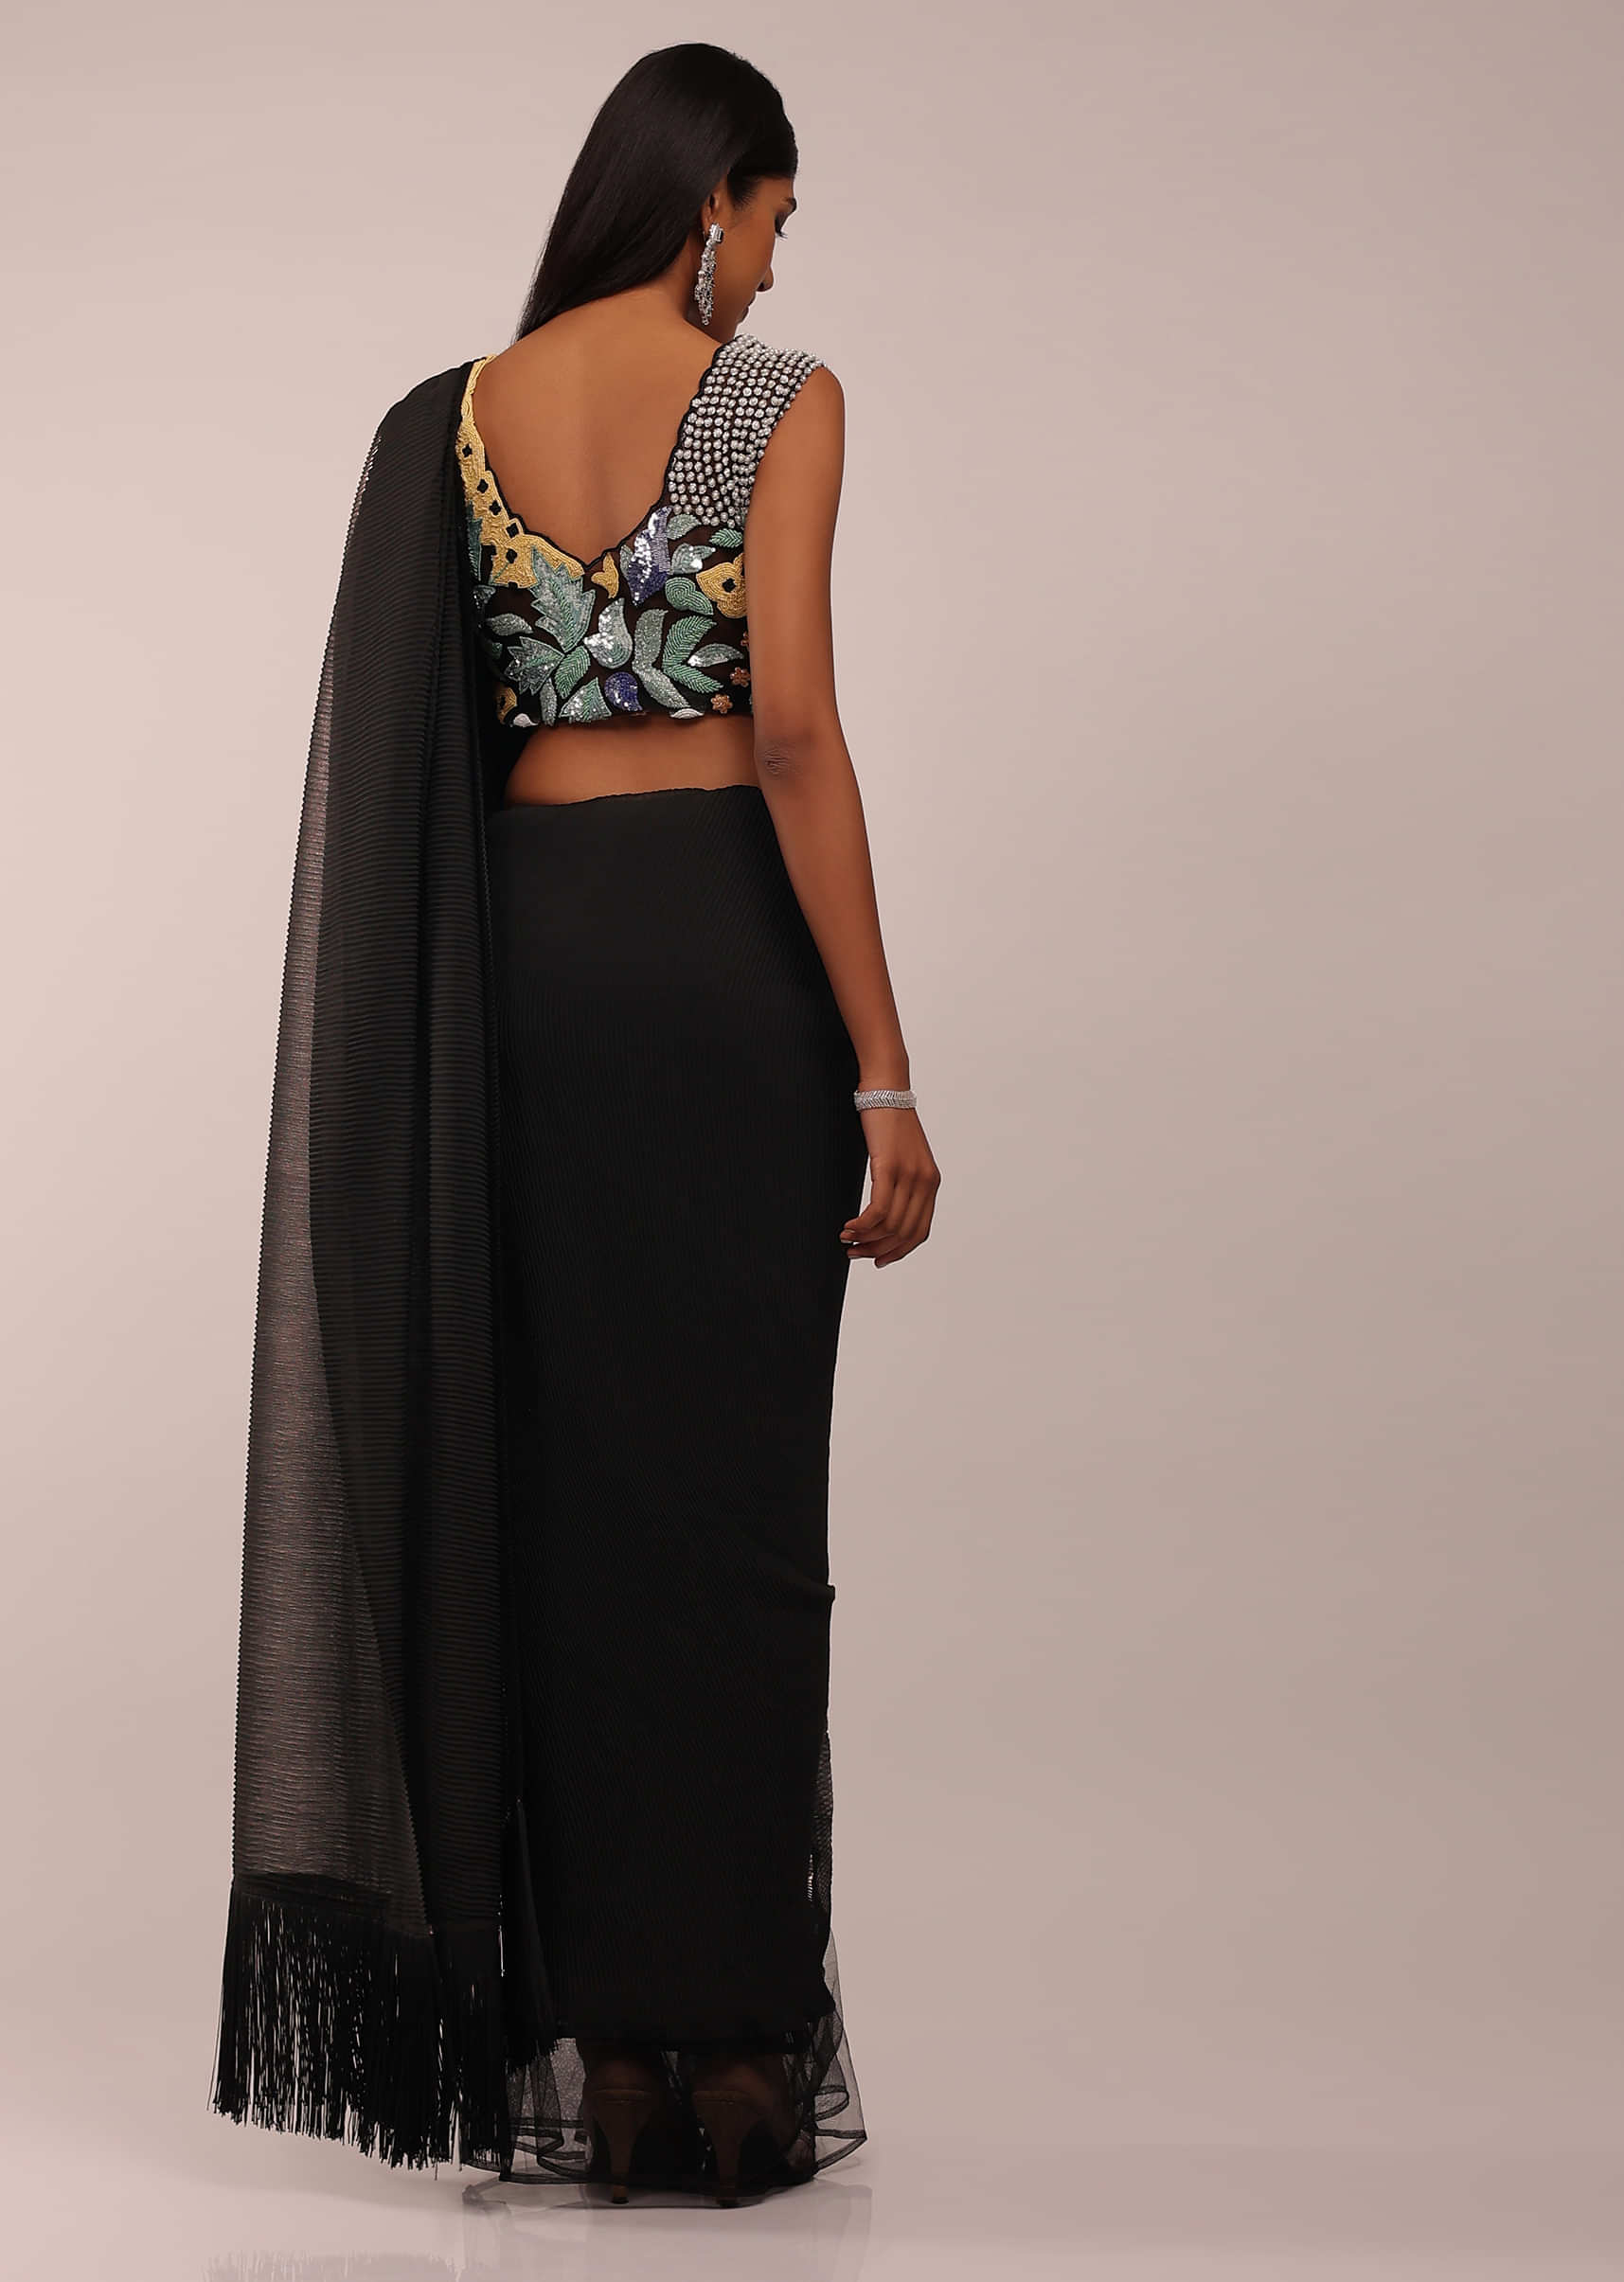 Pitch Black Crush Saree With Net Frills On The Bottom And Tassel Fringes On The Pallu Corner, Paired With A Sleeveless Blouse In Cut Dana And Moti Embroidery Buttis